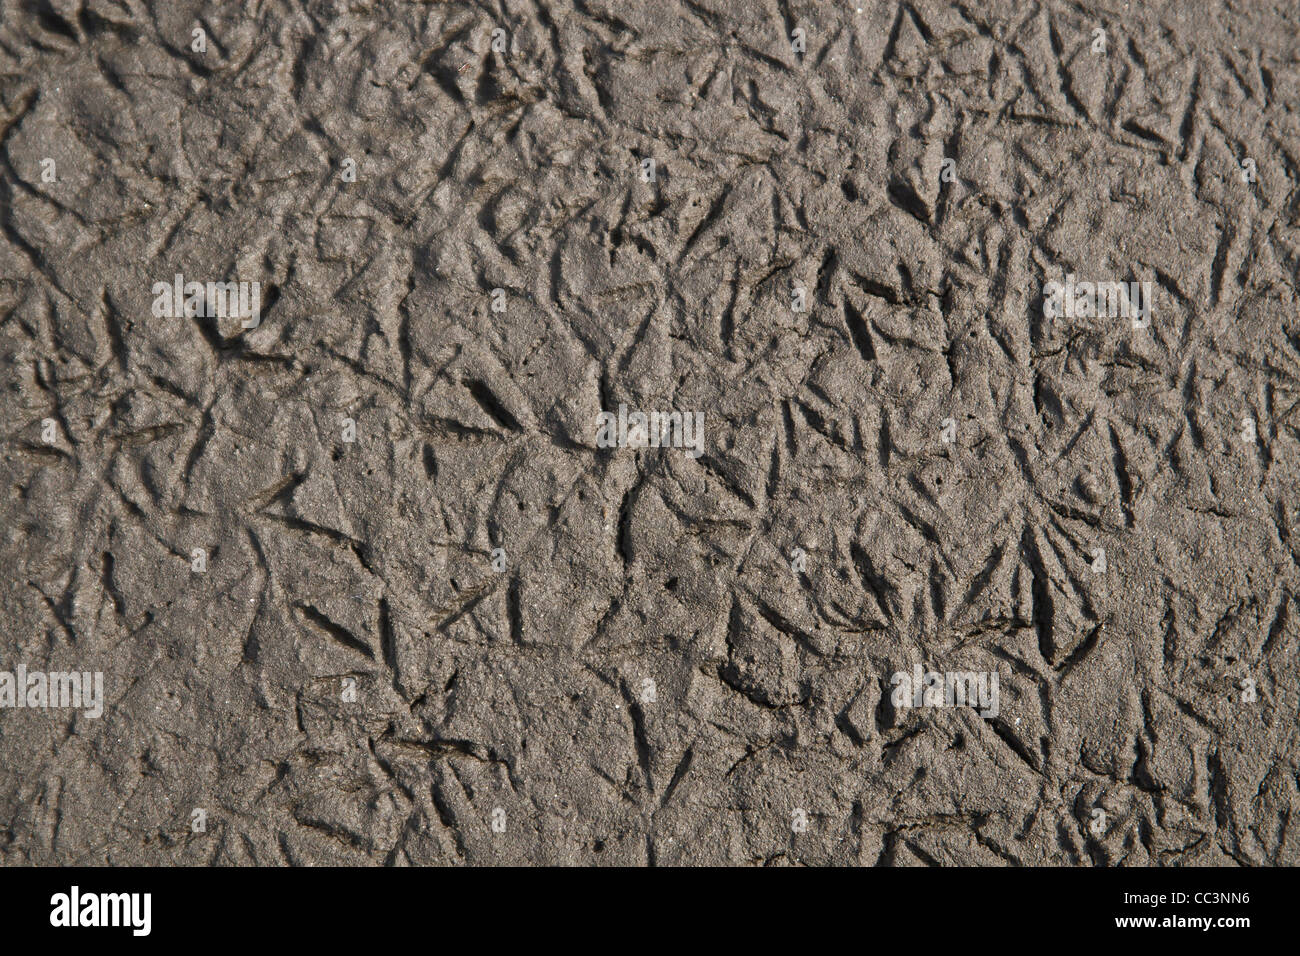 Abstraction pattern of birds footprints on mud. Stock Photo